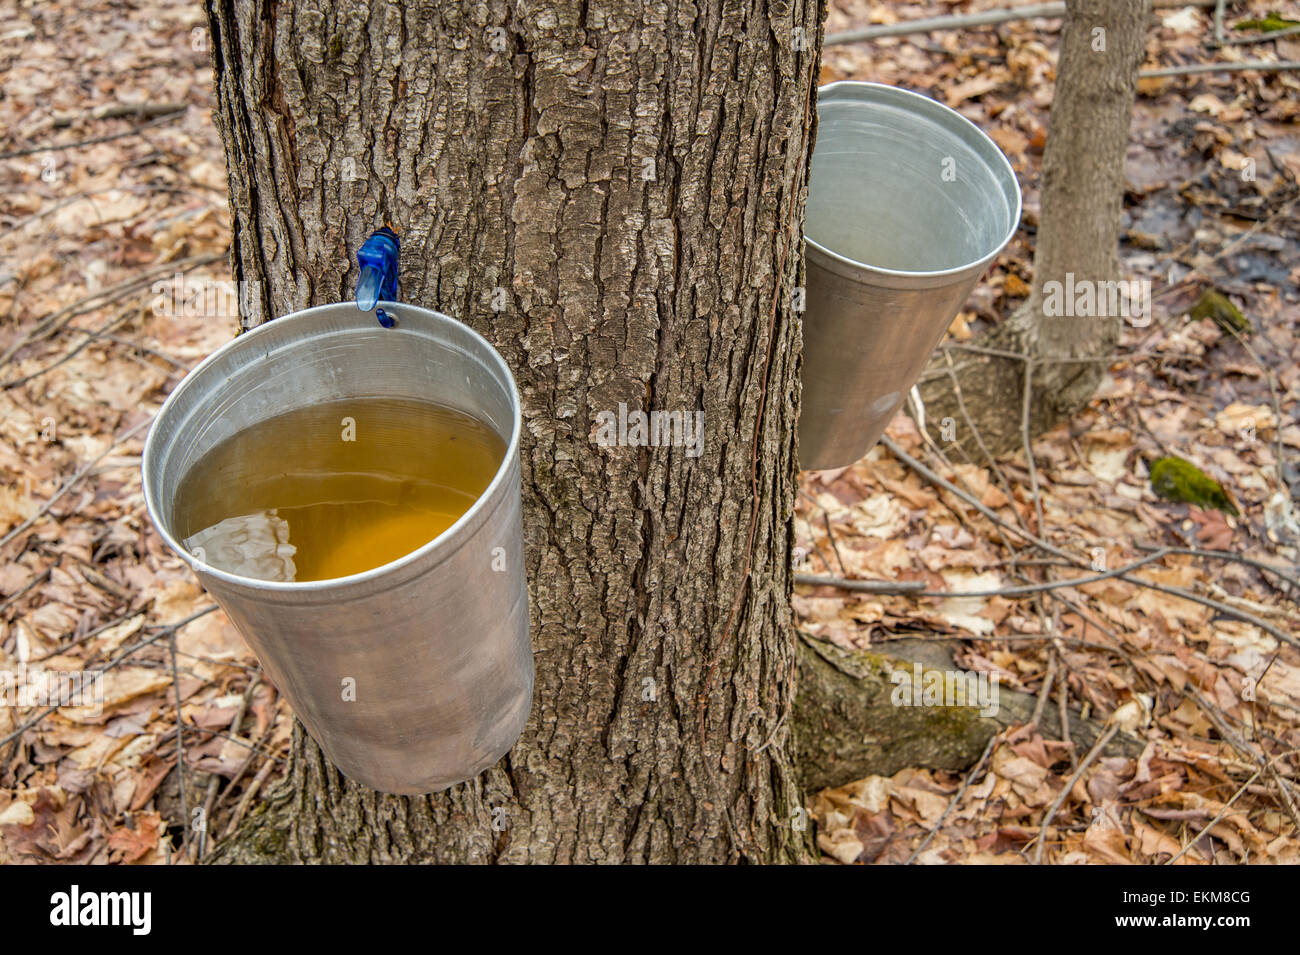 Pail used to collect sap of maple trees to produce maple syrup in Quebec. Stock Photo